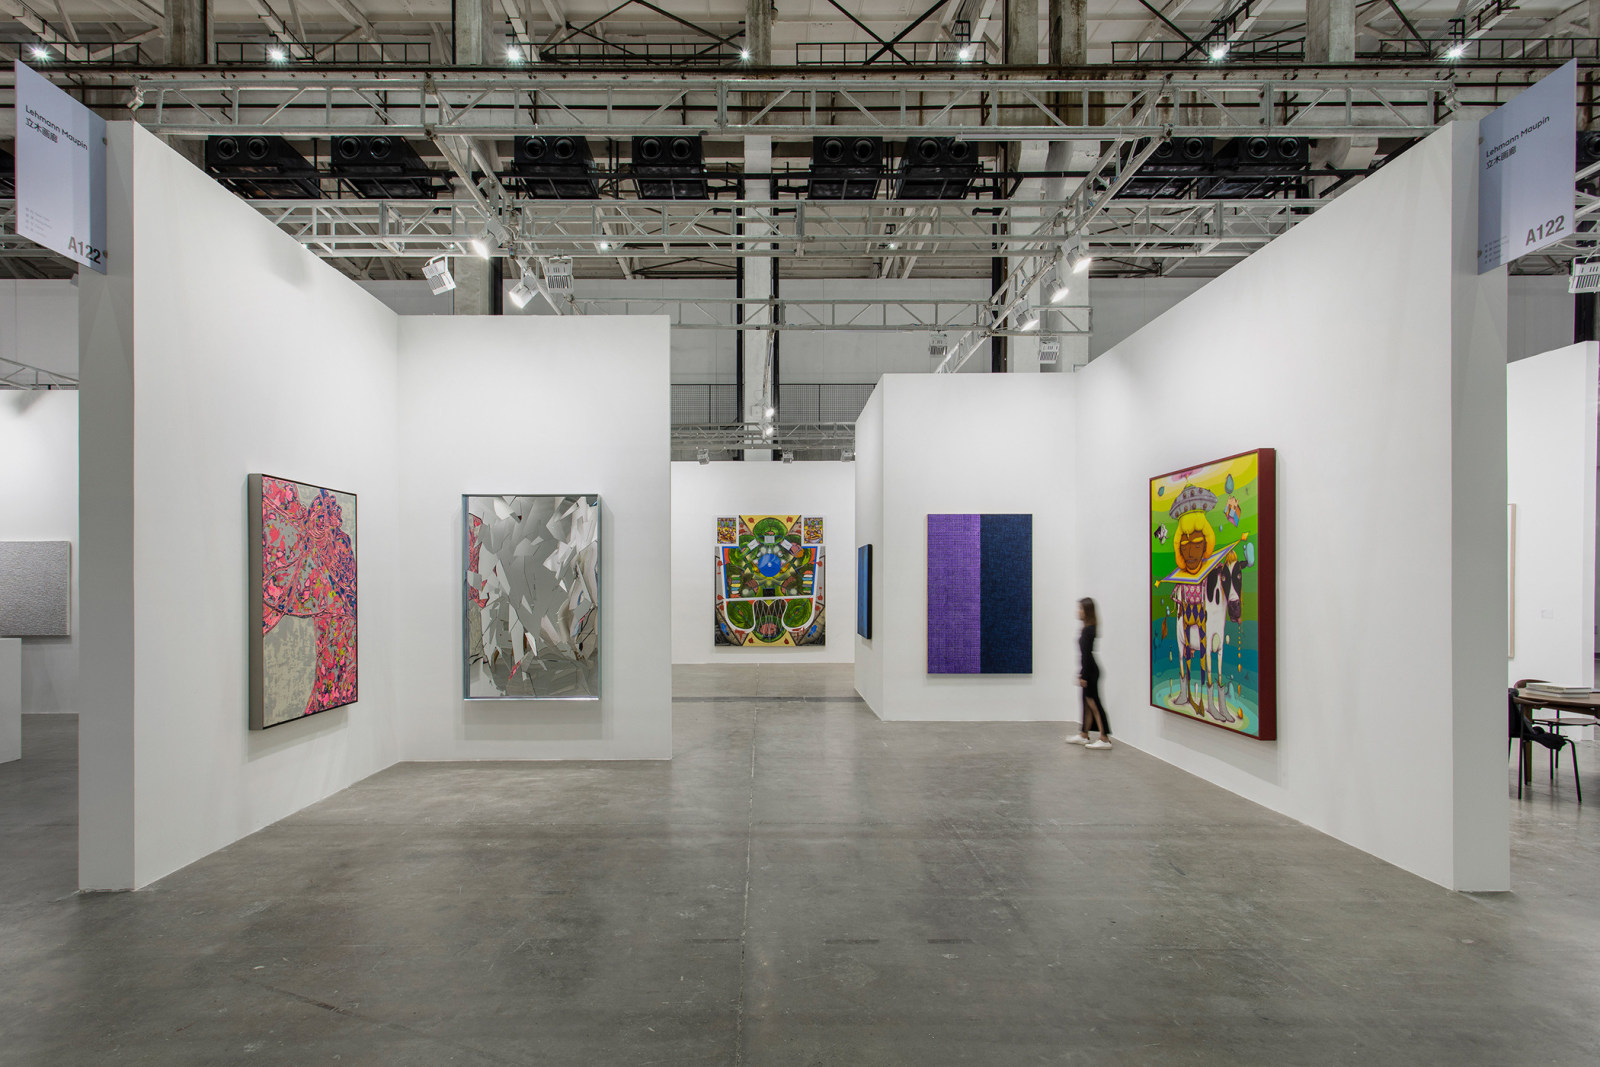 First installation view of Lehmann Maupin's booth at West Bund Art &amp; Design 2020 showing five paintings and one mirrored sculpture hanging on the wall. One person is walking through the booth.